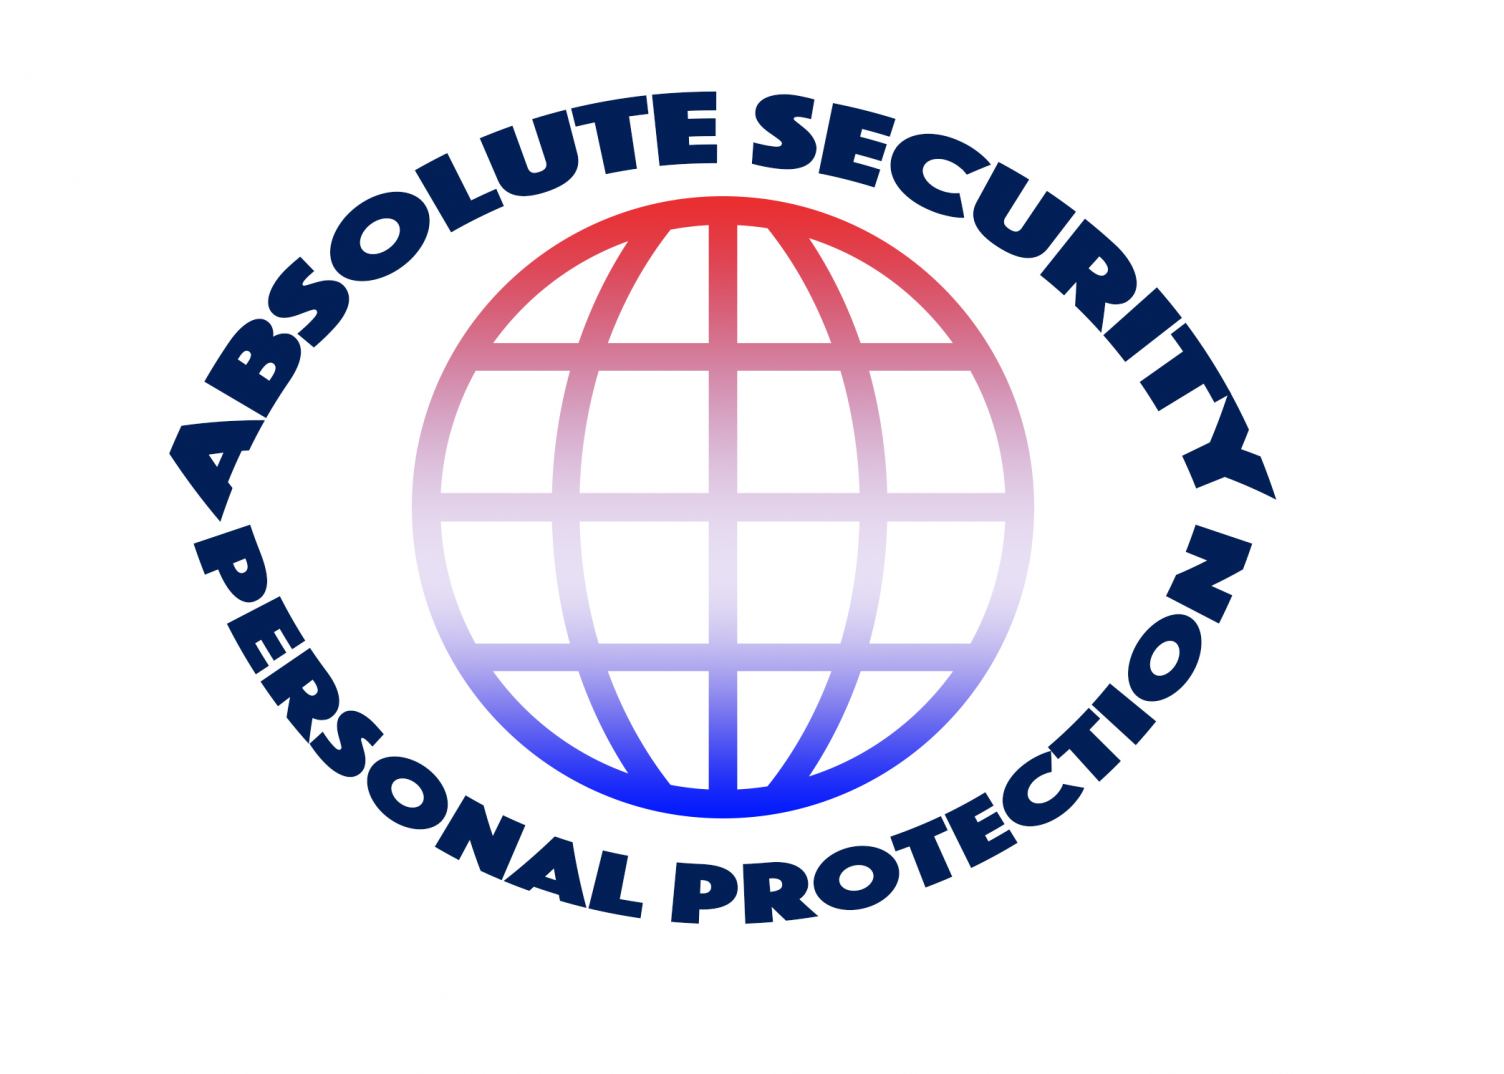 absolutesecurity Logo